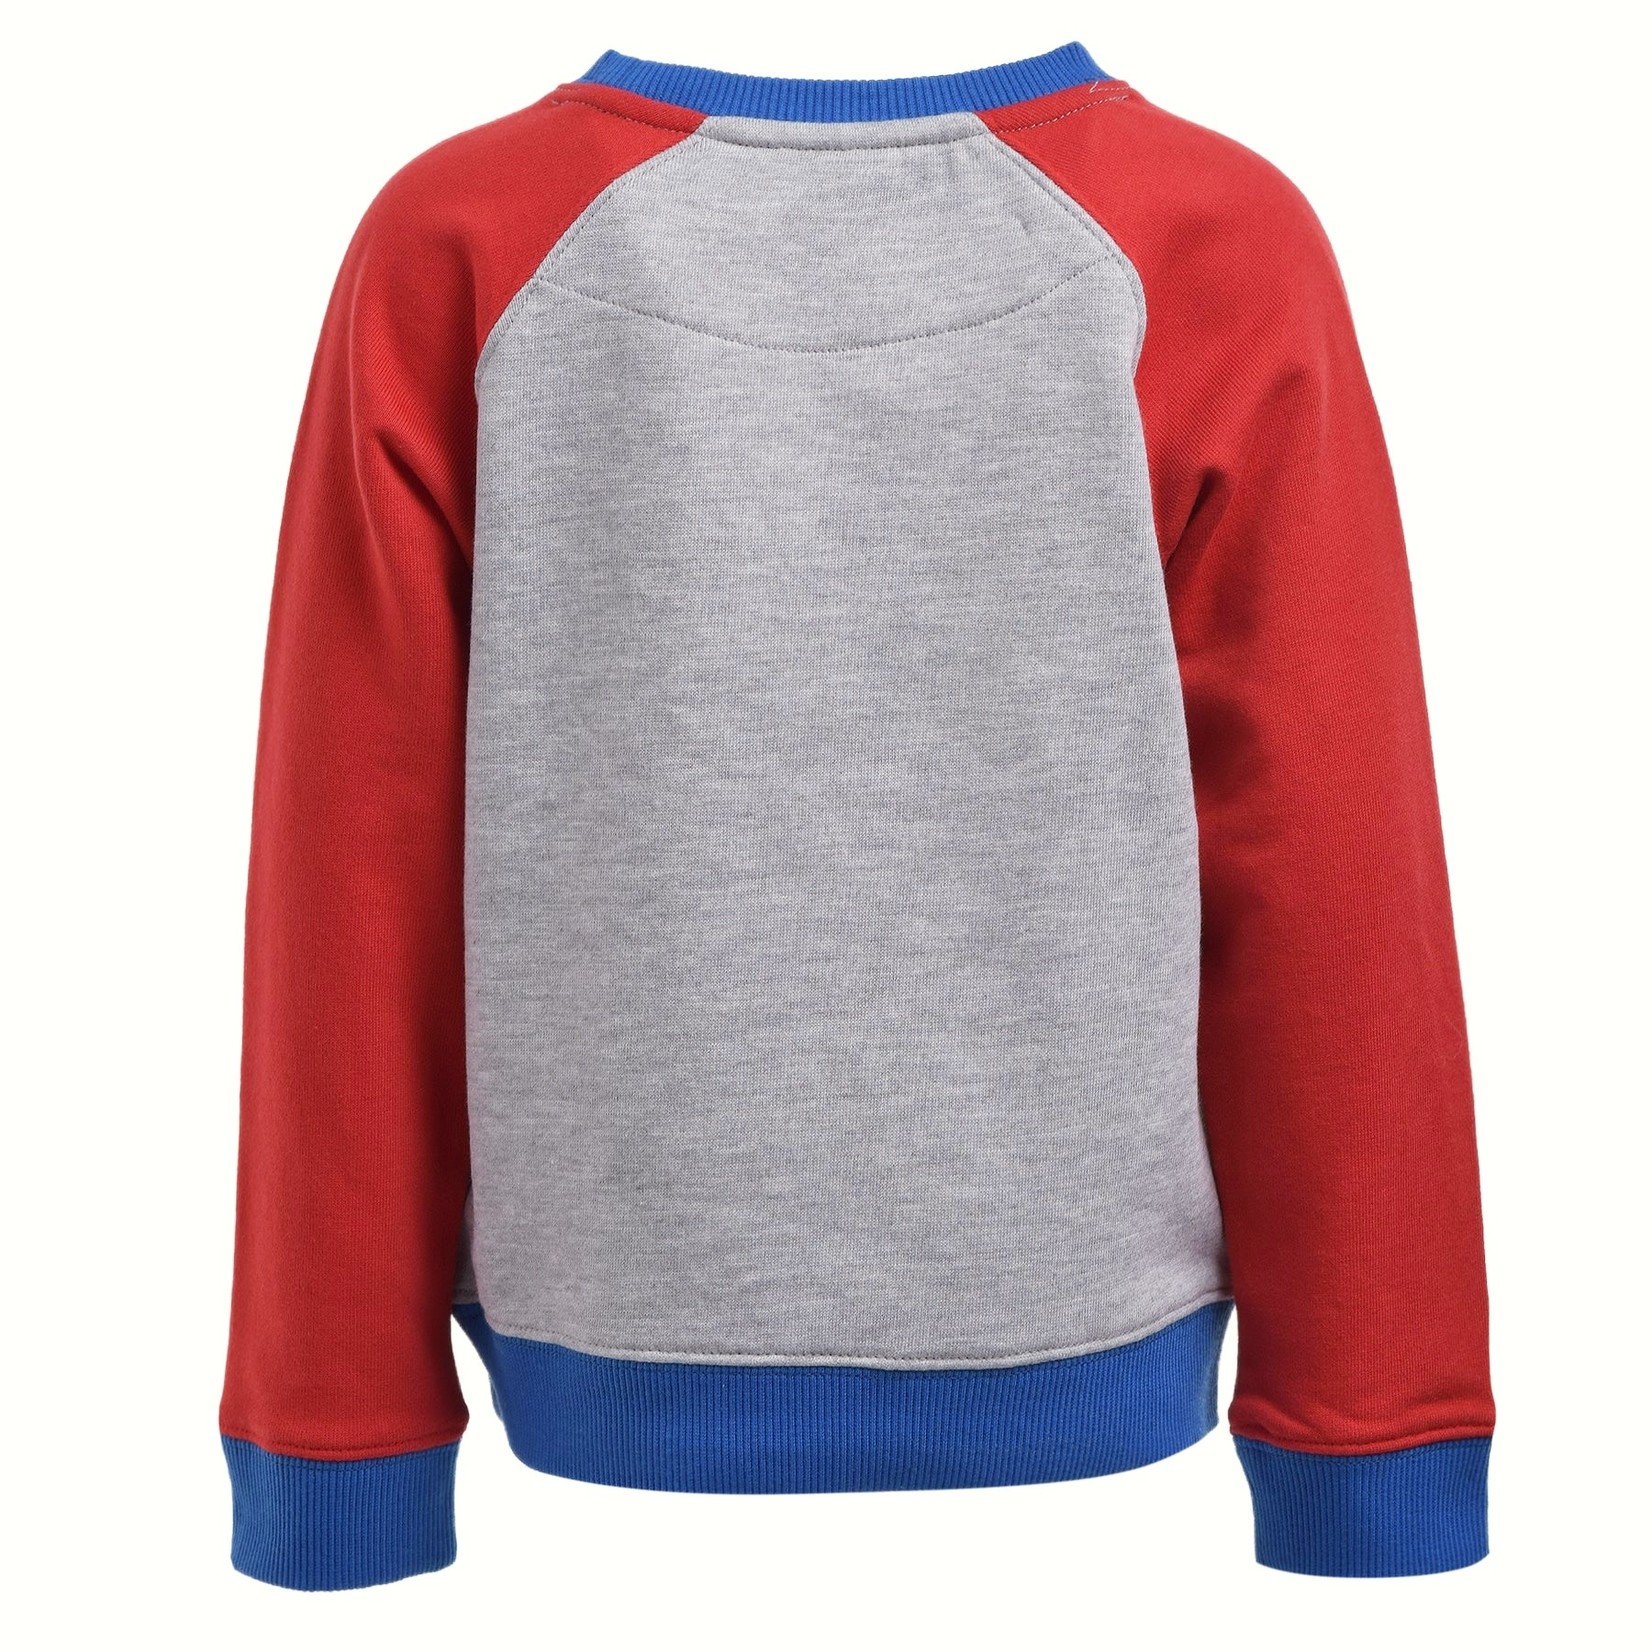 L&P L&P - French Terry Crewneck Sweater 'Marakesh - Red, Grey & Blue'